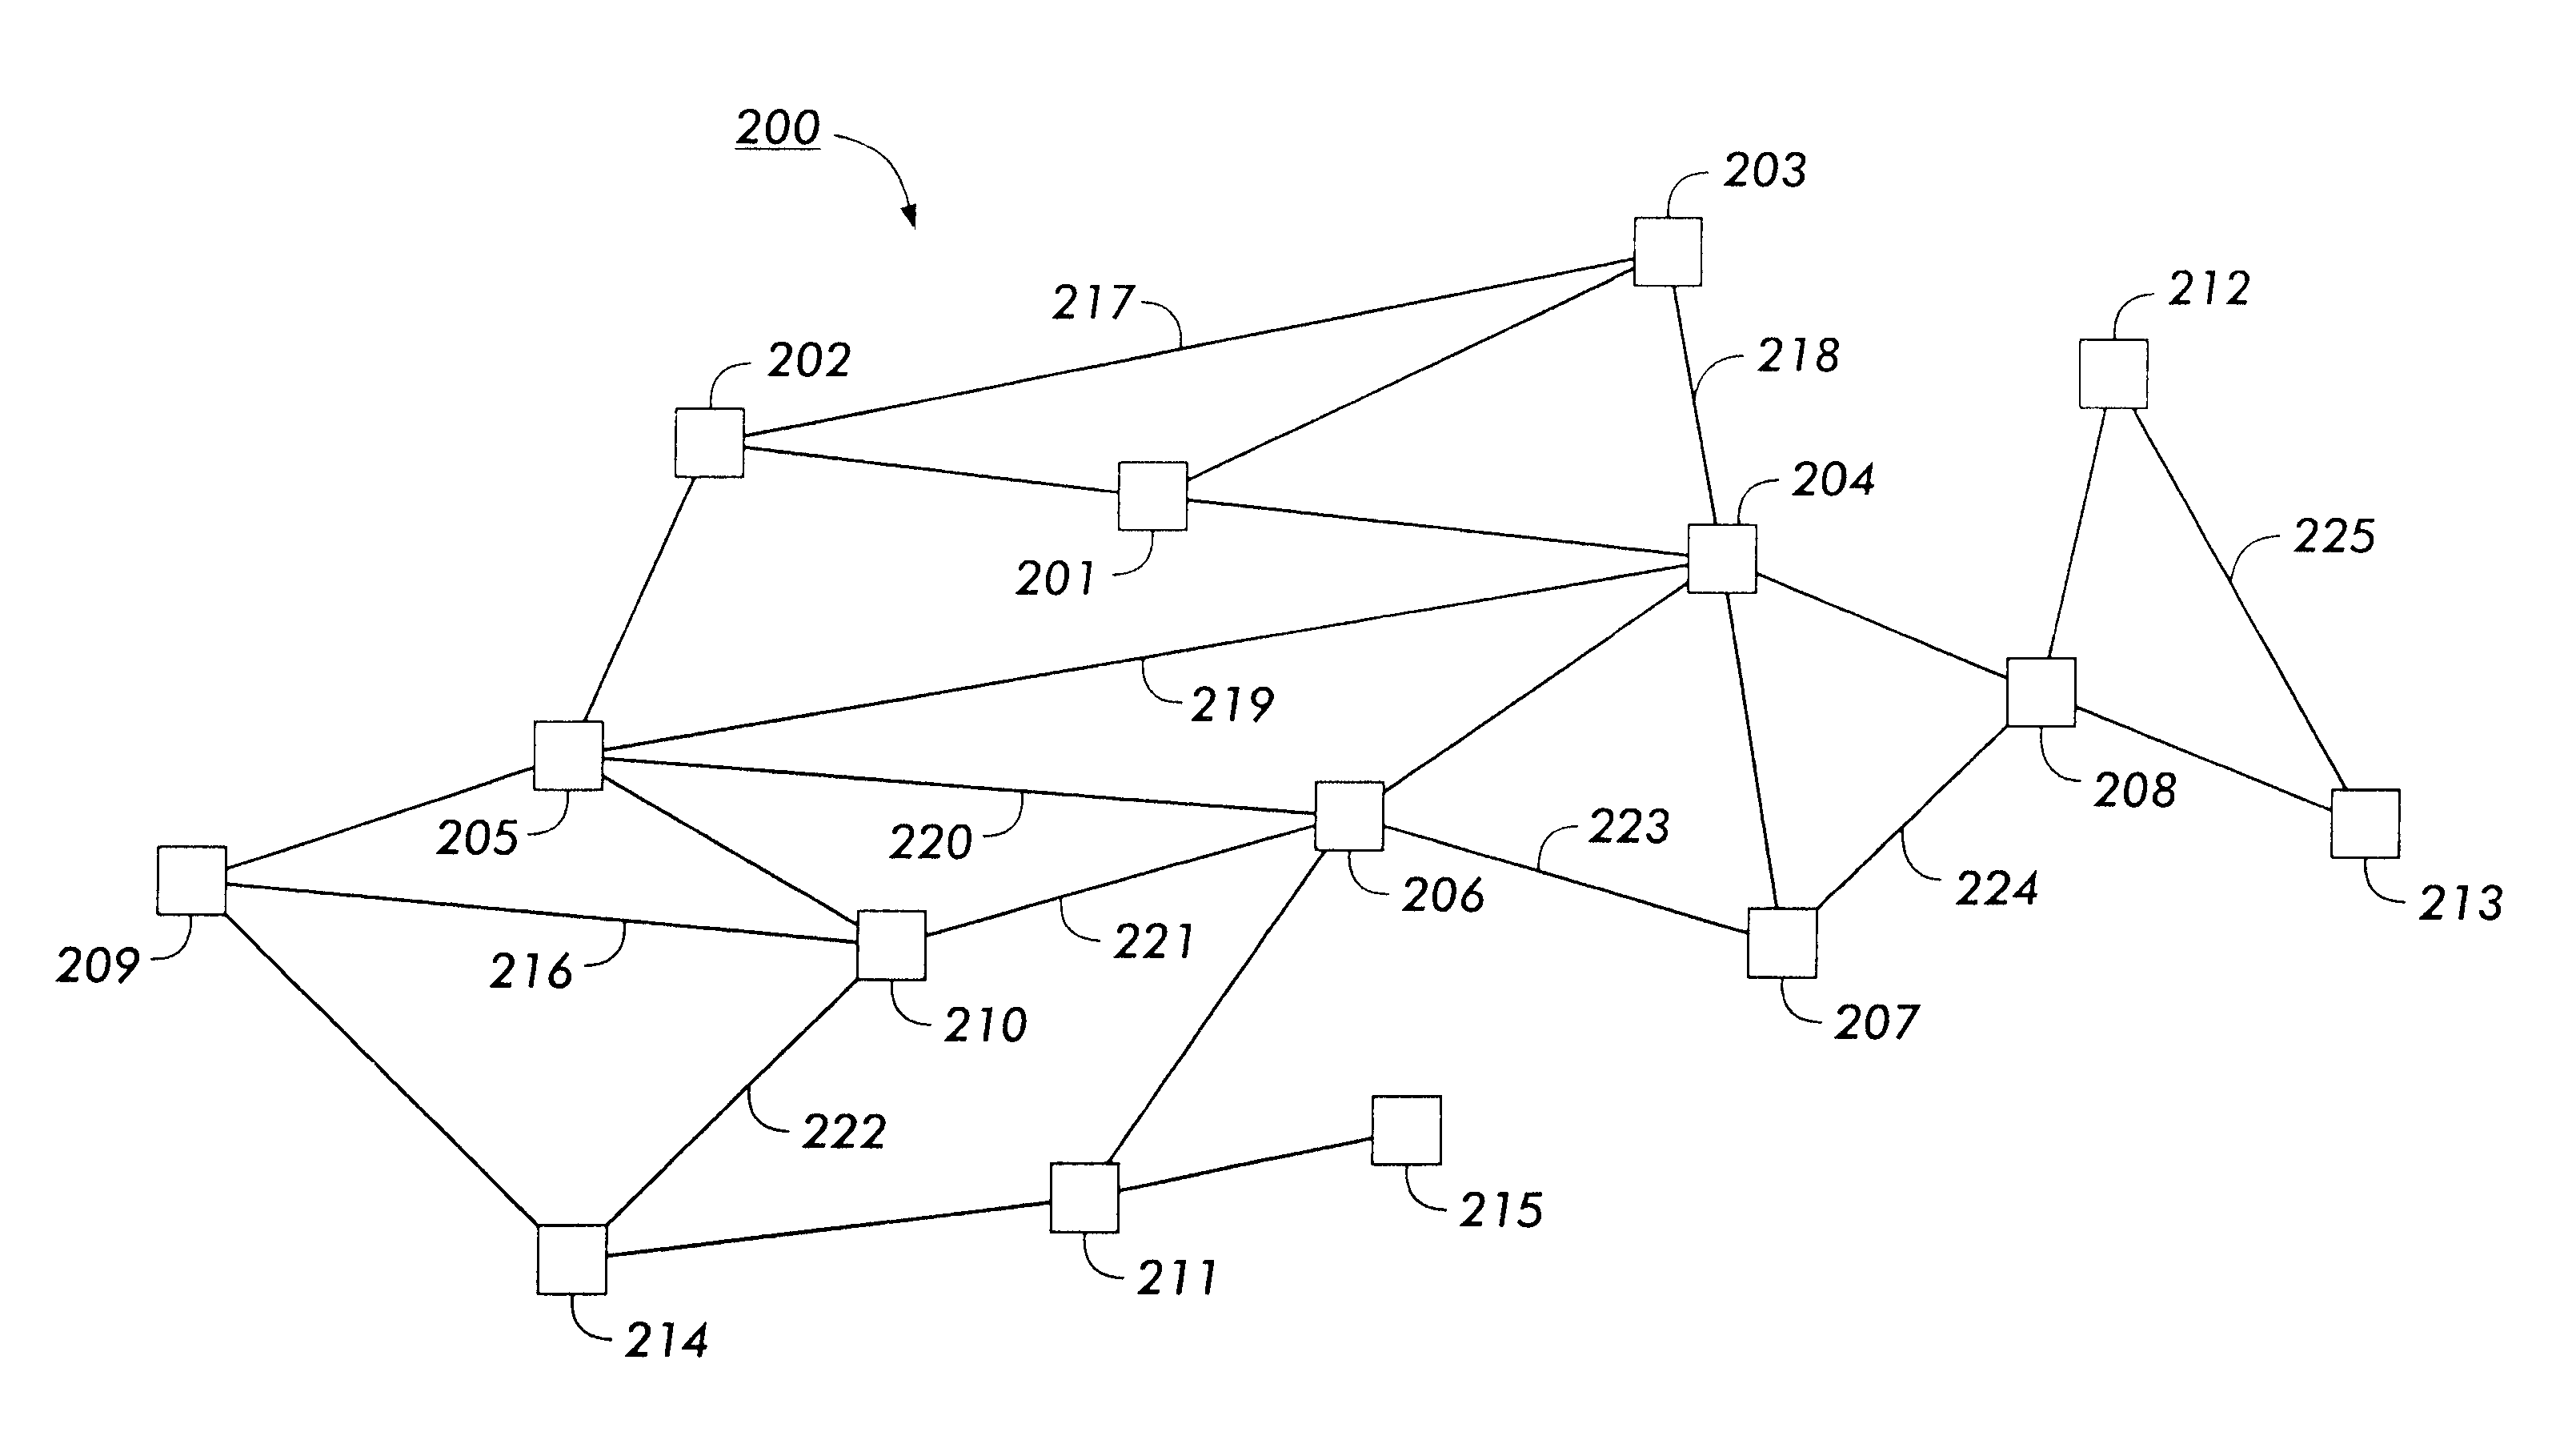 Usage based methods of traversing and displaying generalized graph structures